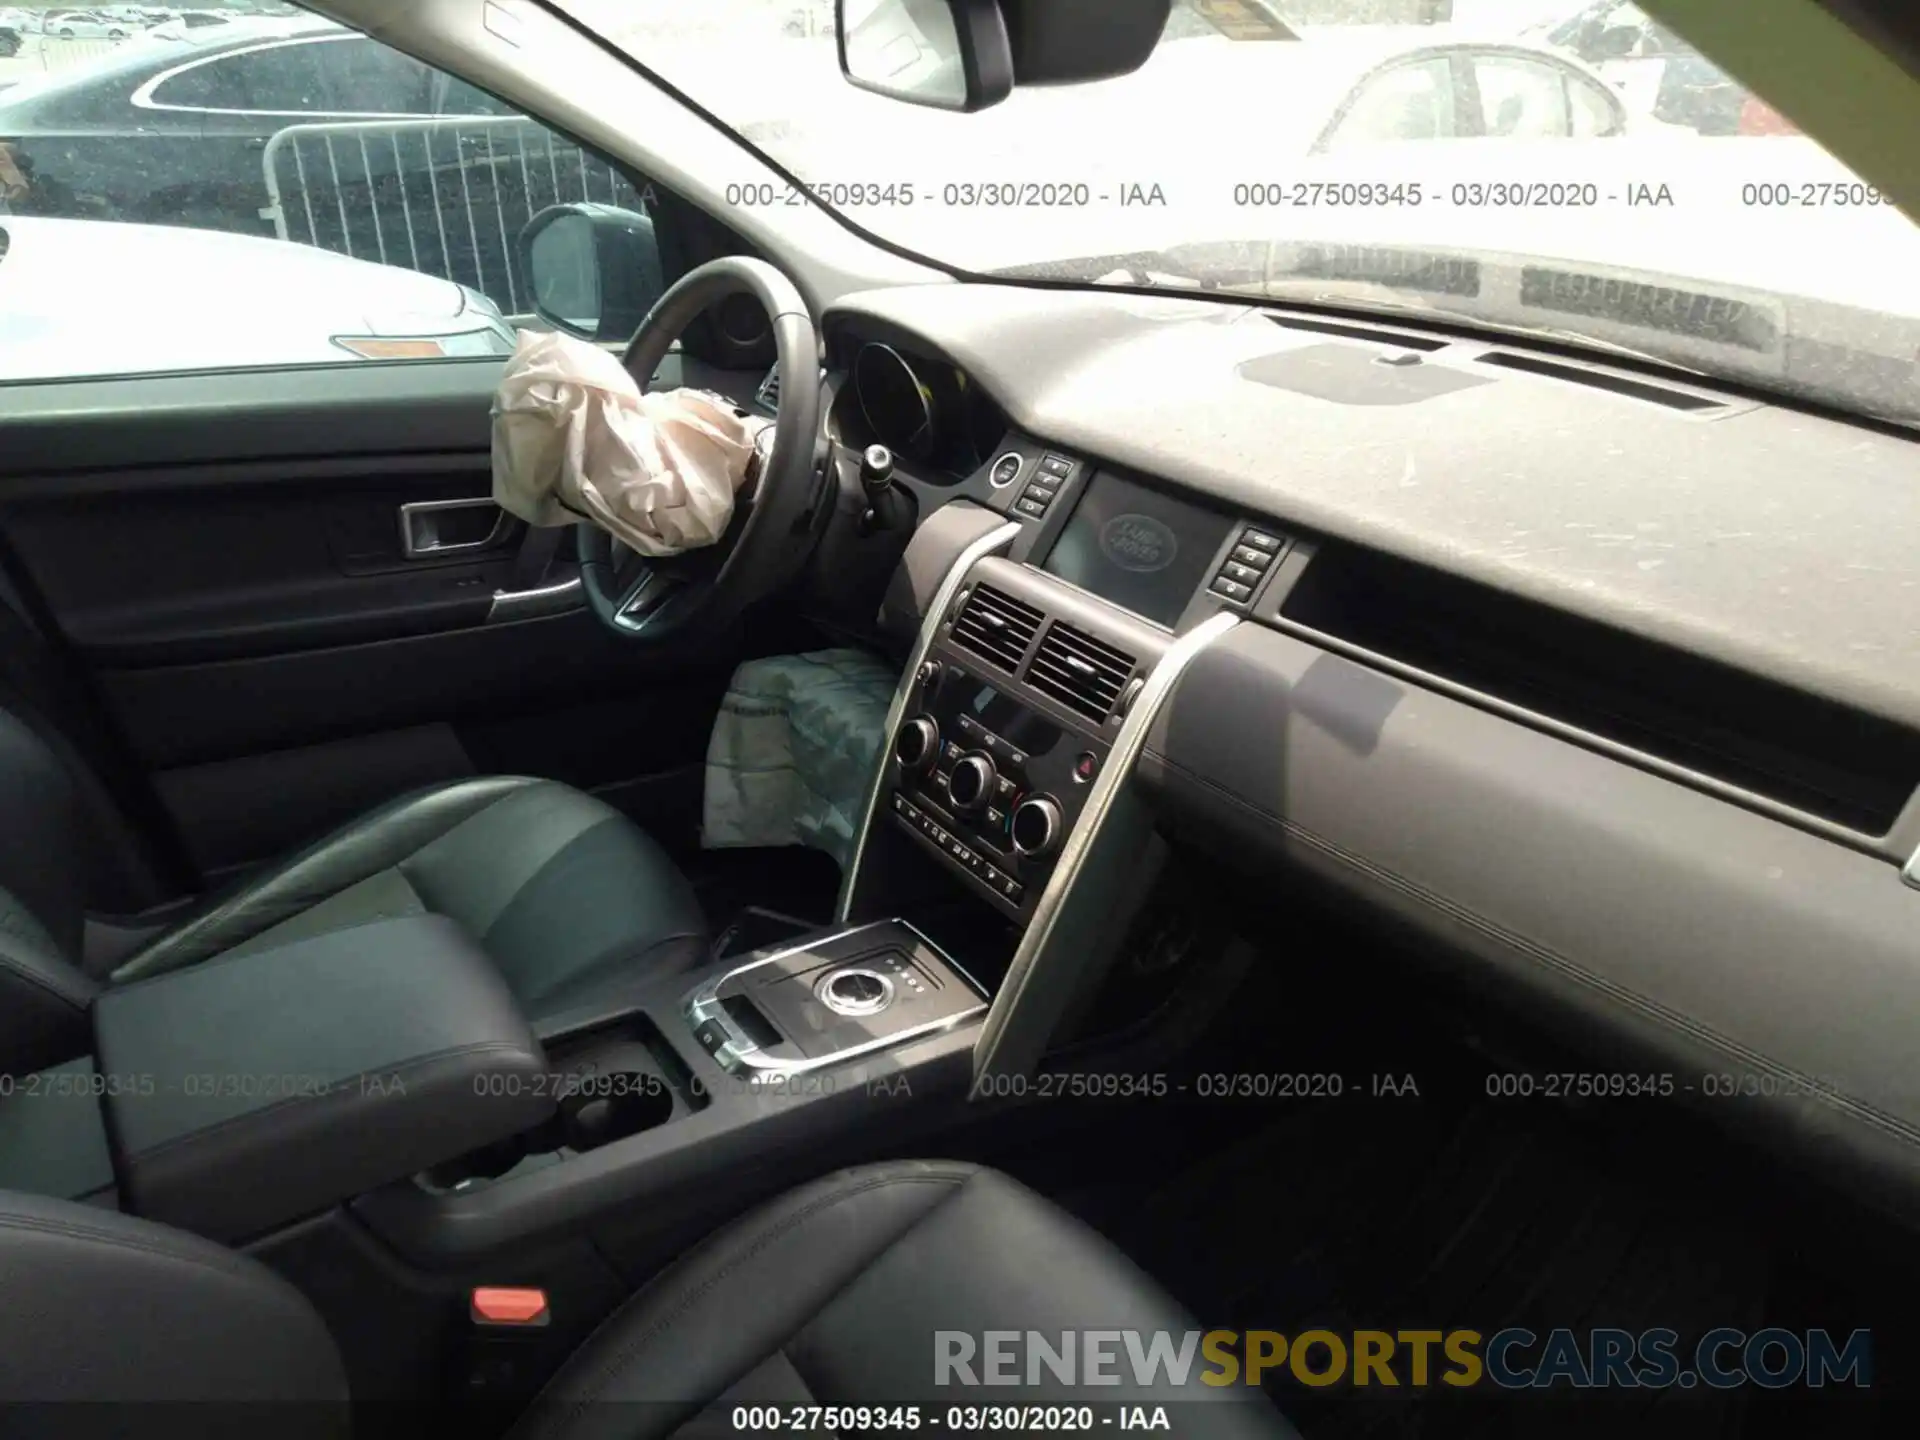 5 Photograph of a damaged car SALCP2FX9KH785673 LAND ROVER DISCOVERY SPORT 2019